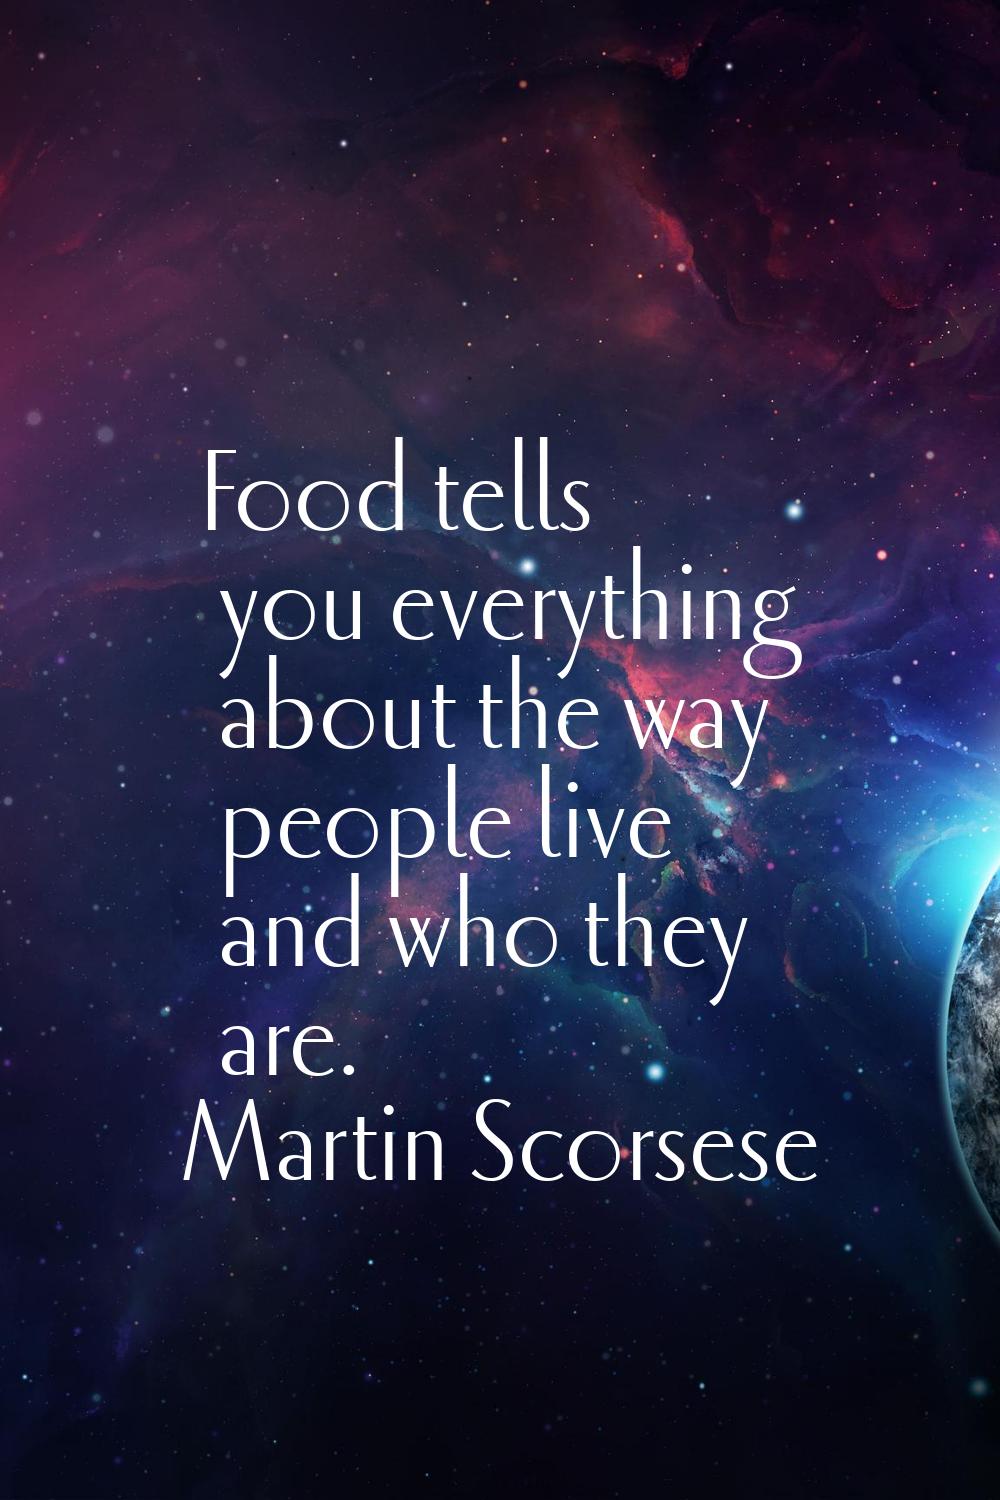 Food tells you everything about the way people live and who they are.